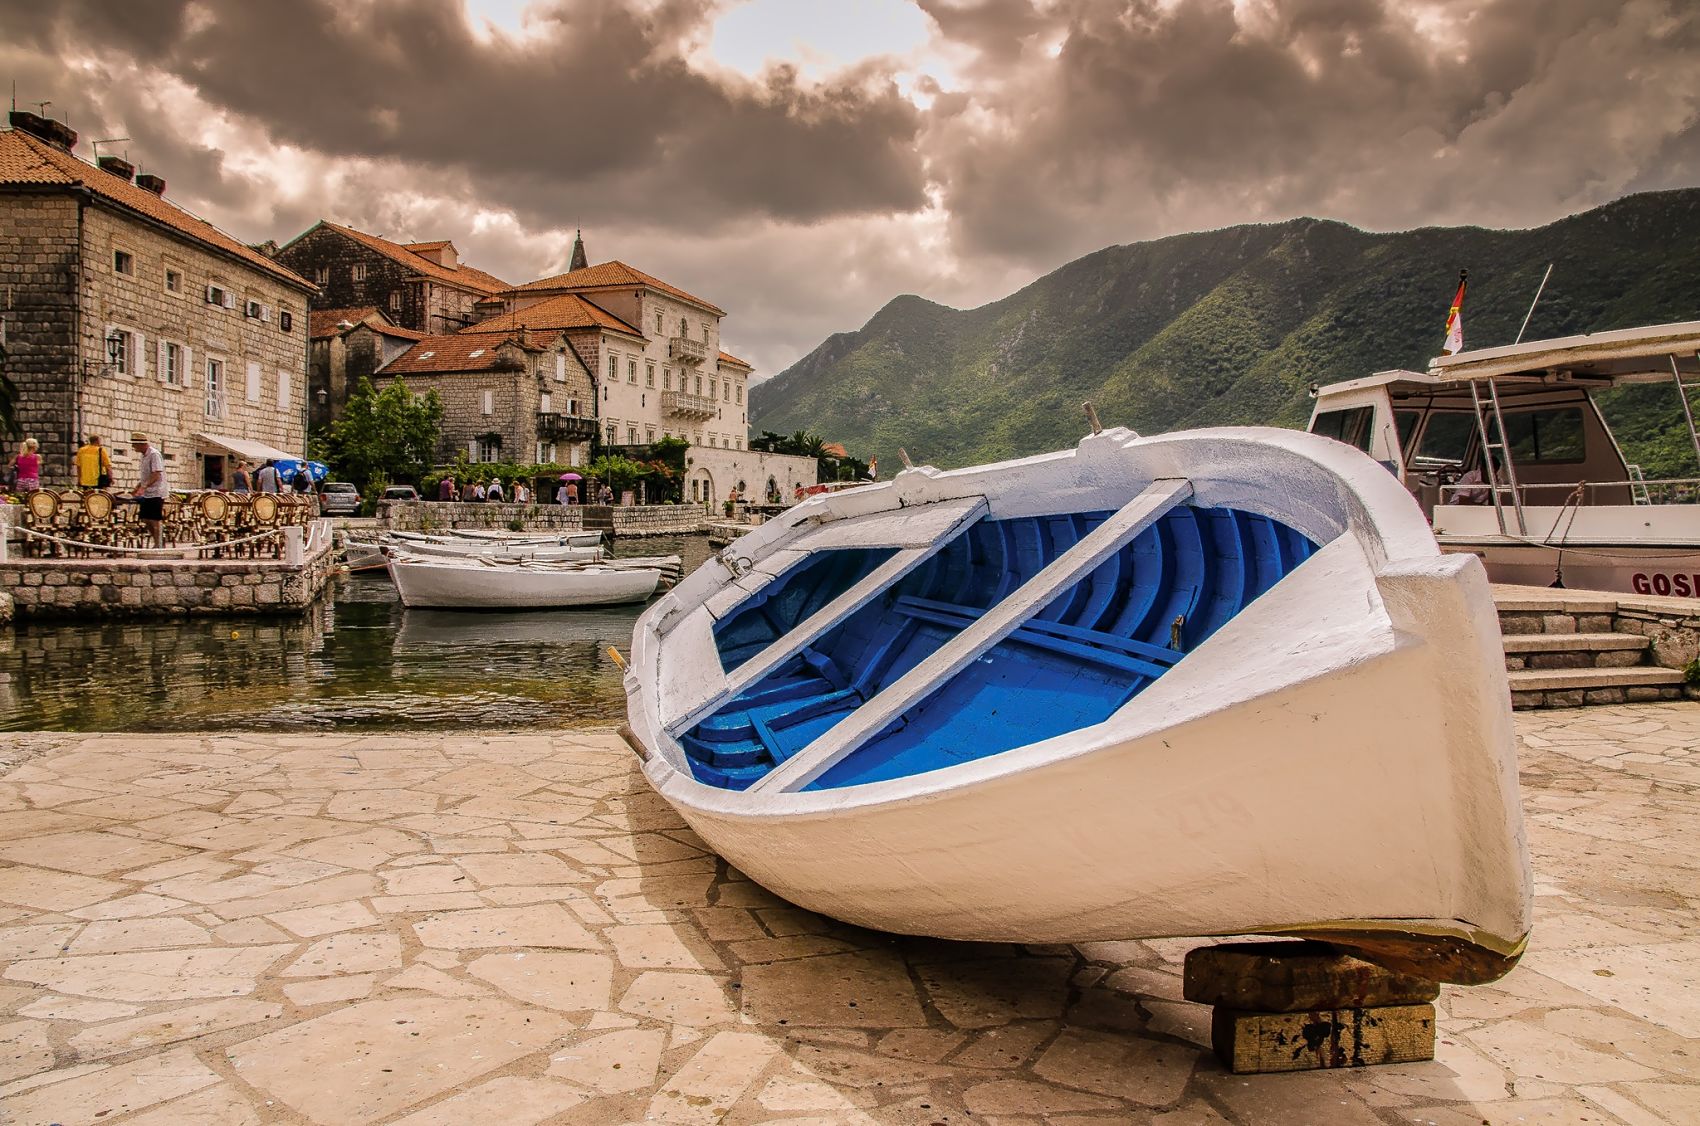 Old boat on the pear,Montenegro